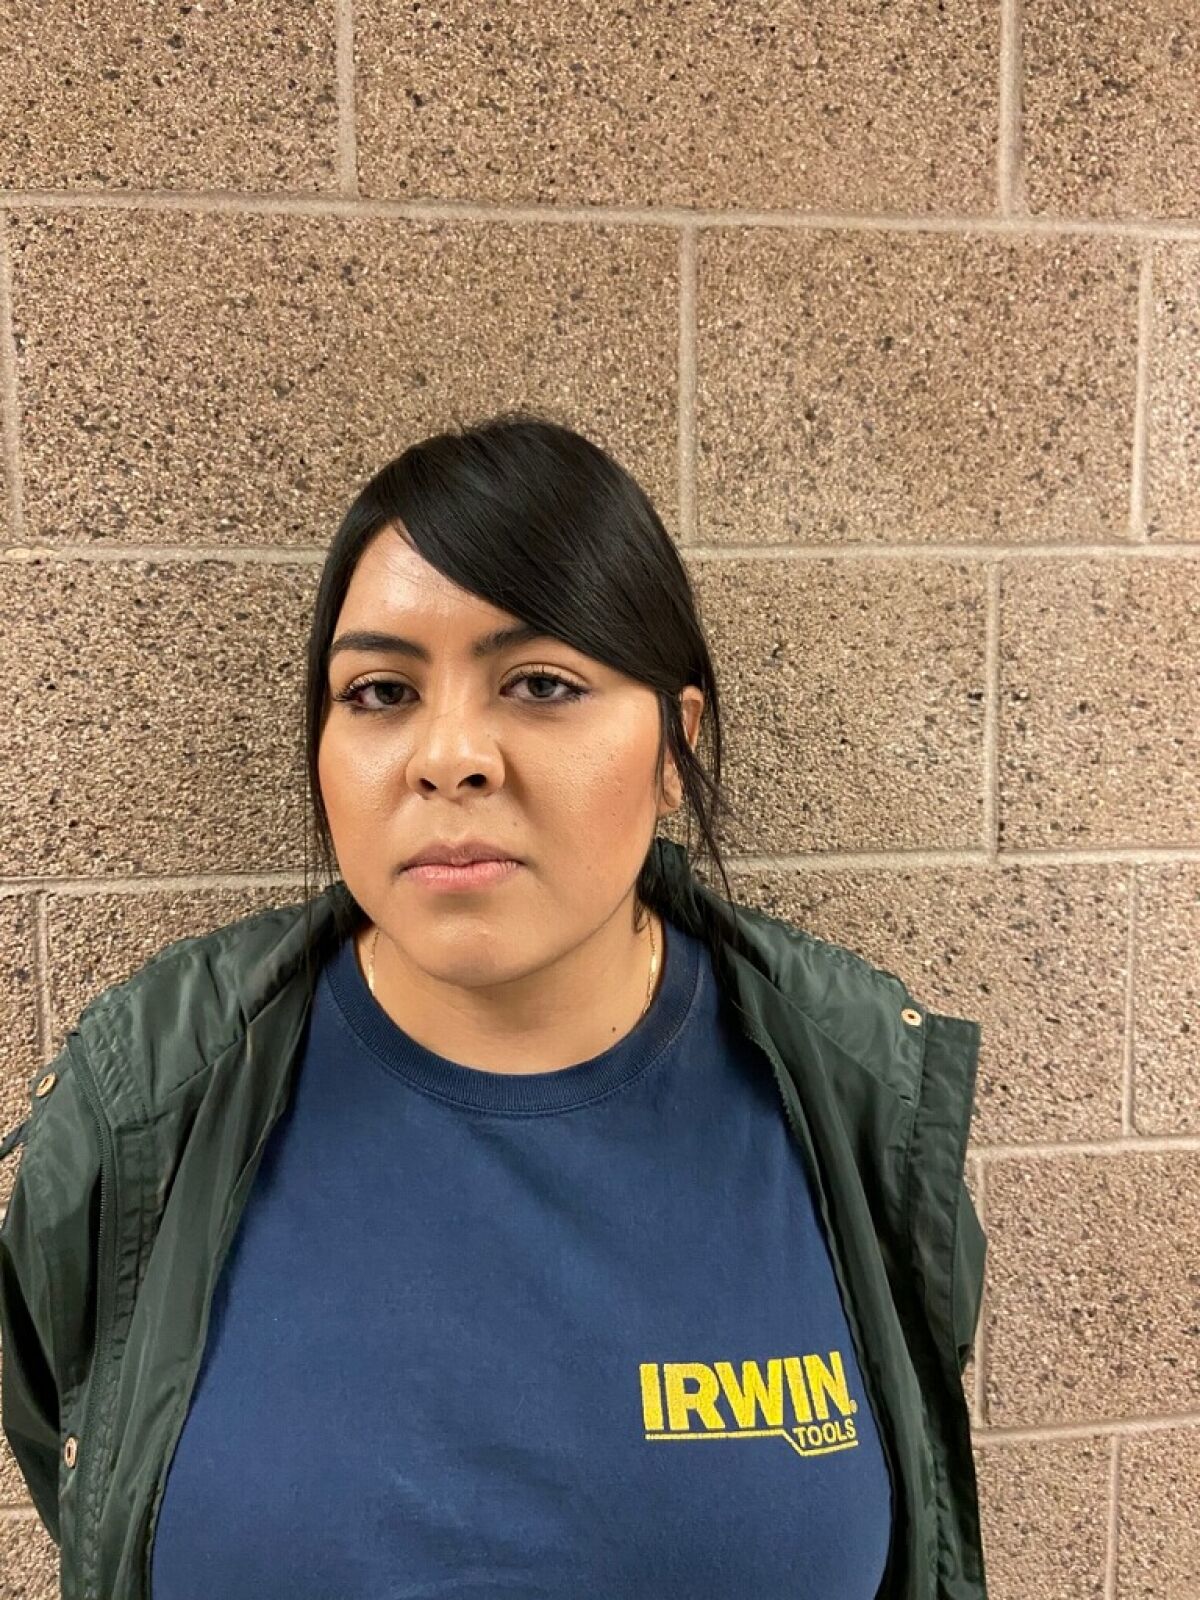 Anayeli DominguezPena, 25, of Ontario faces felony and misdemeanor charges after authorities say she reported false threats directed at the University of La Verne, a student group, its members, and herself.